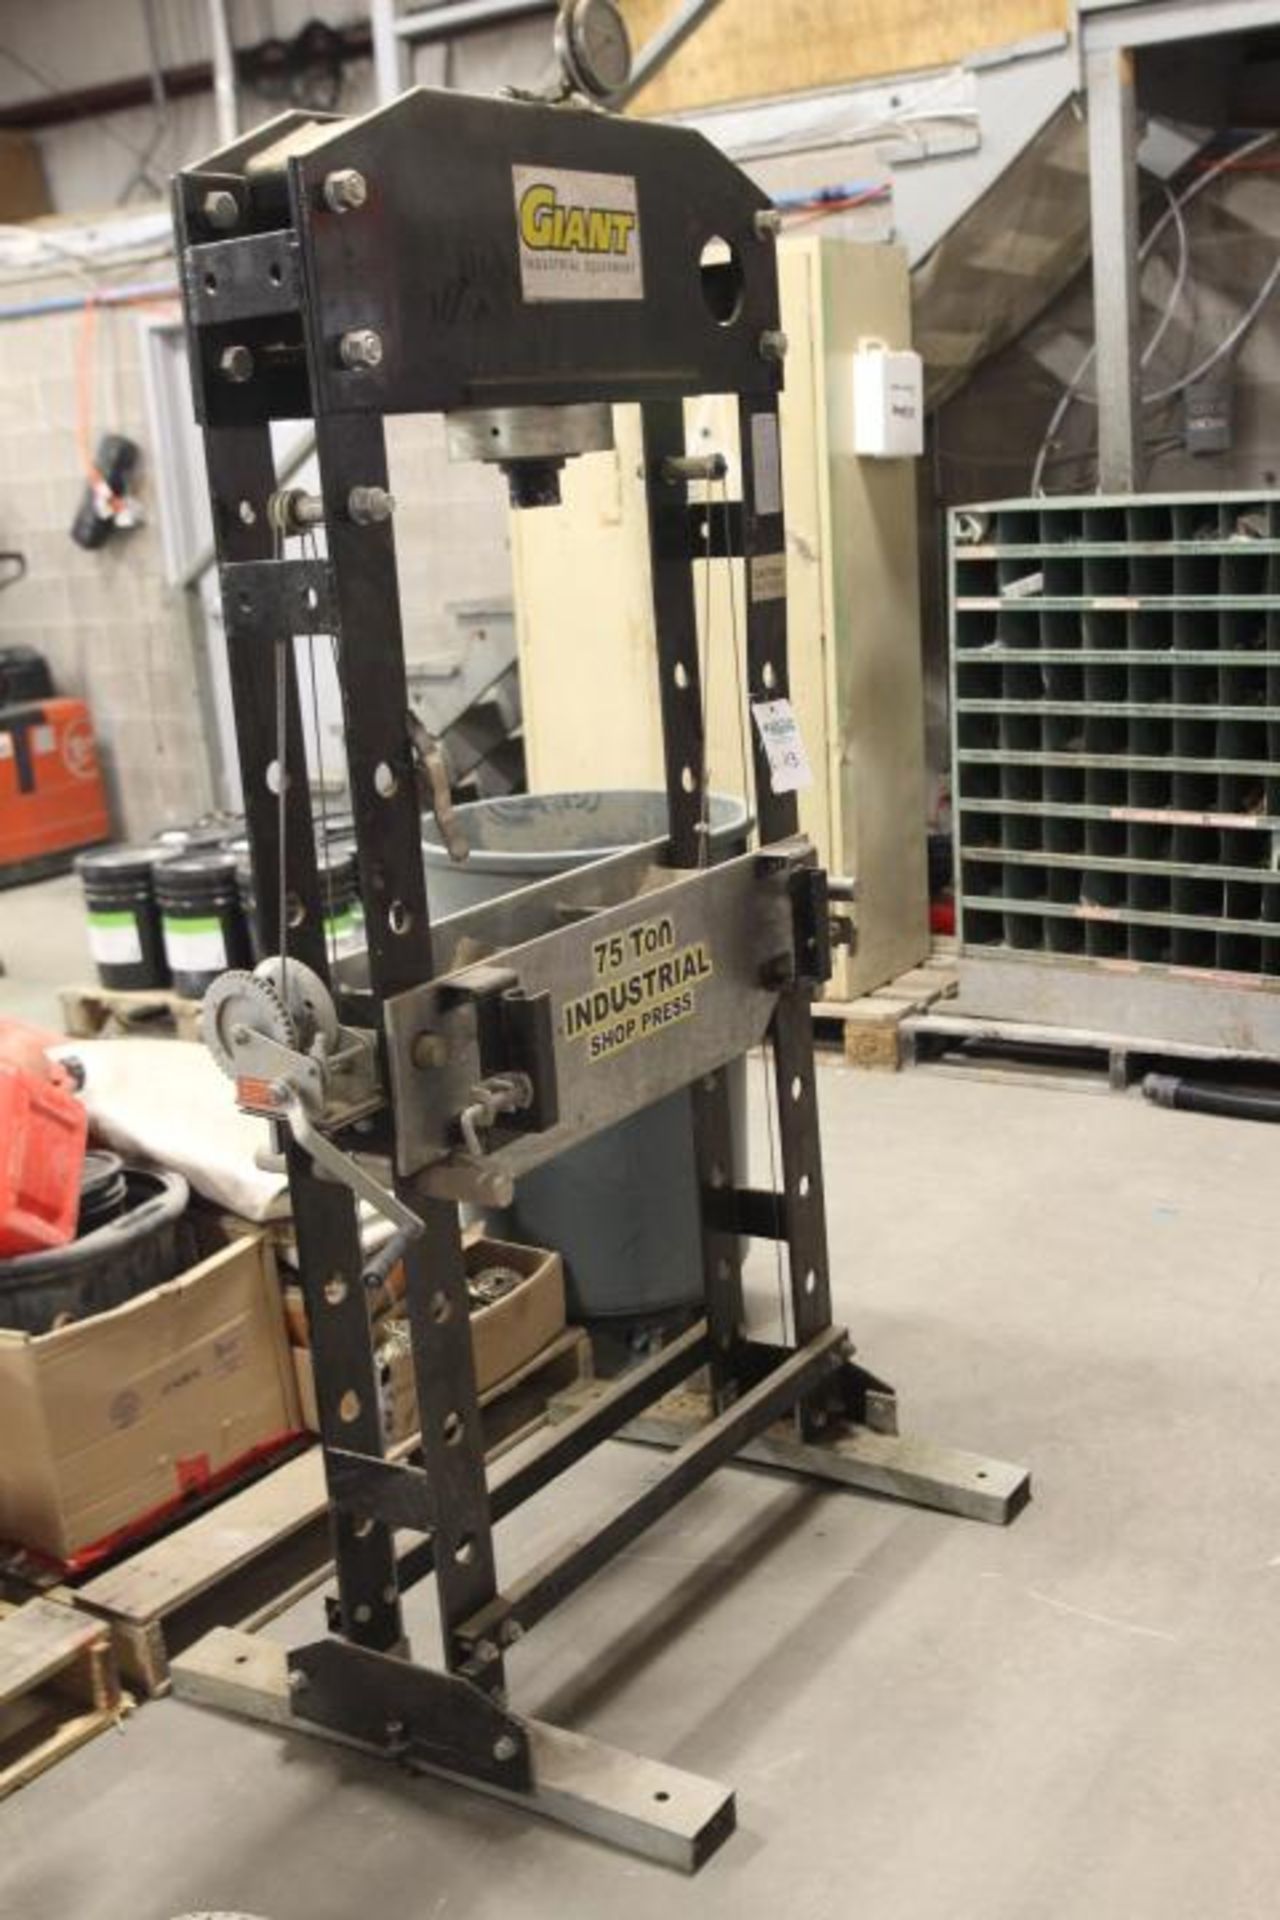 Giant Industrial 75ton Industrial Shop Press - Image 2 of 3